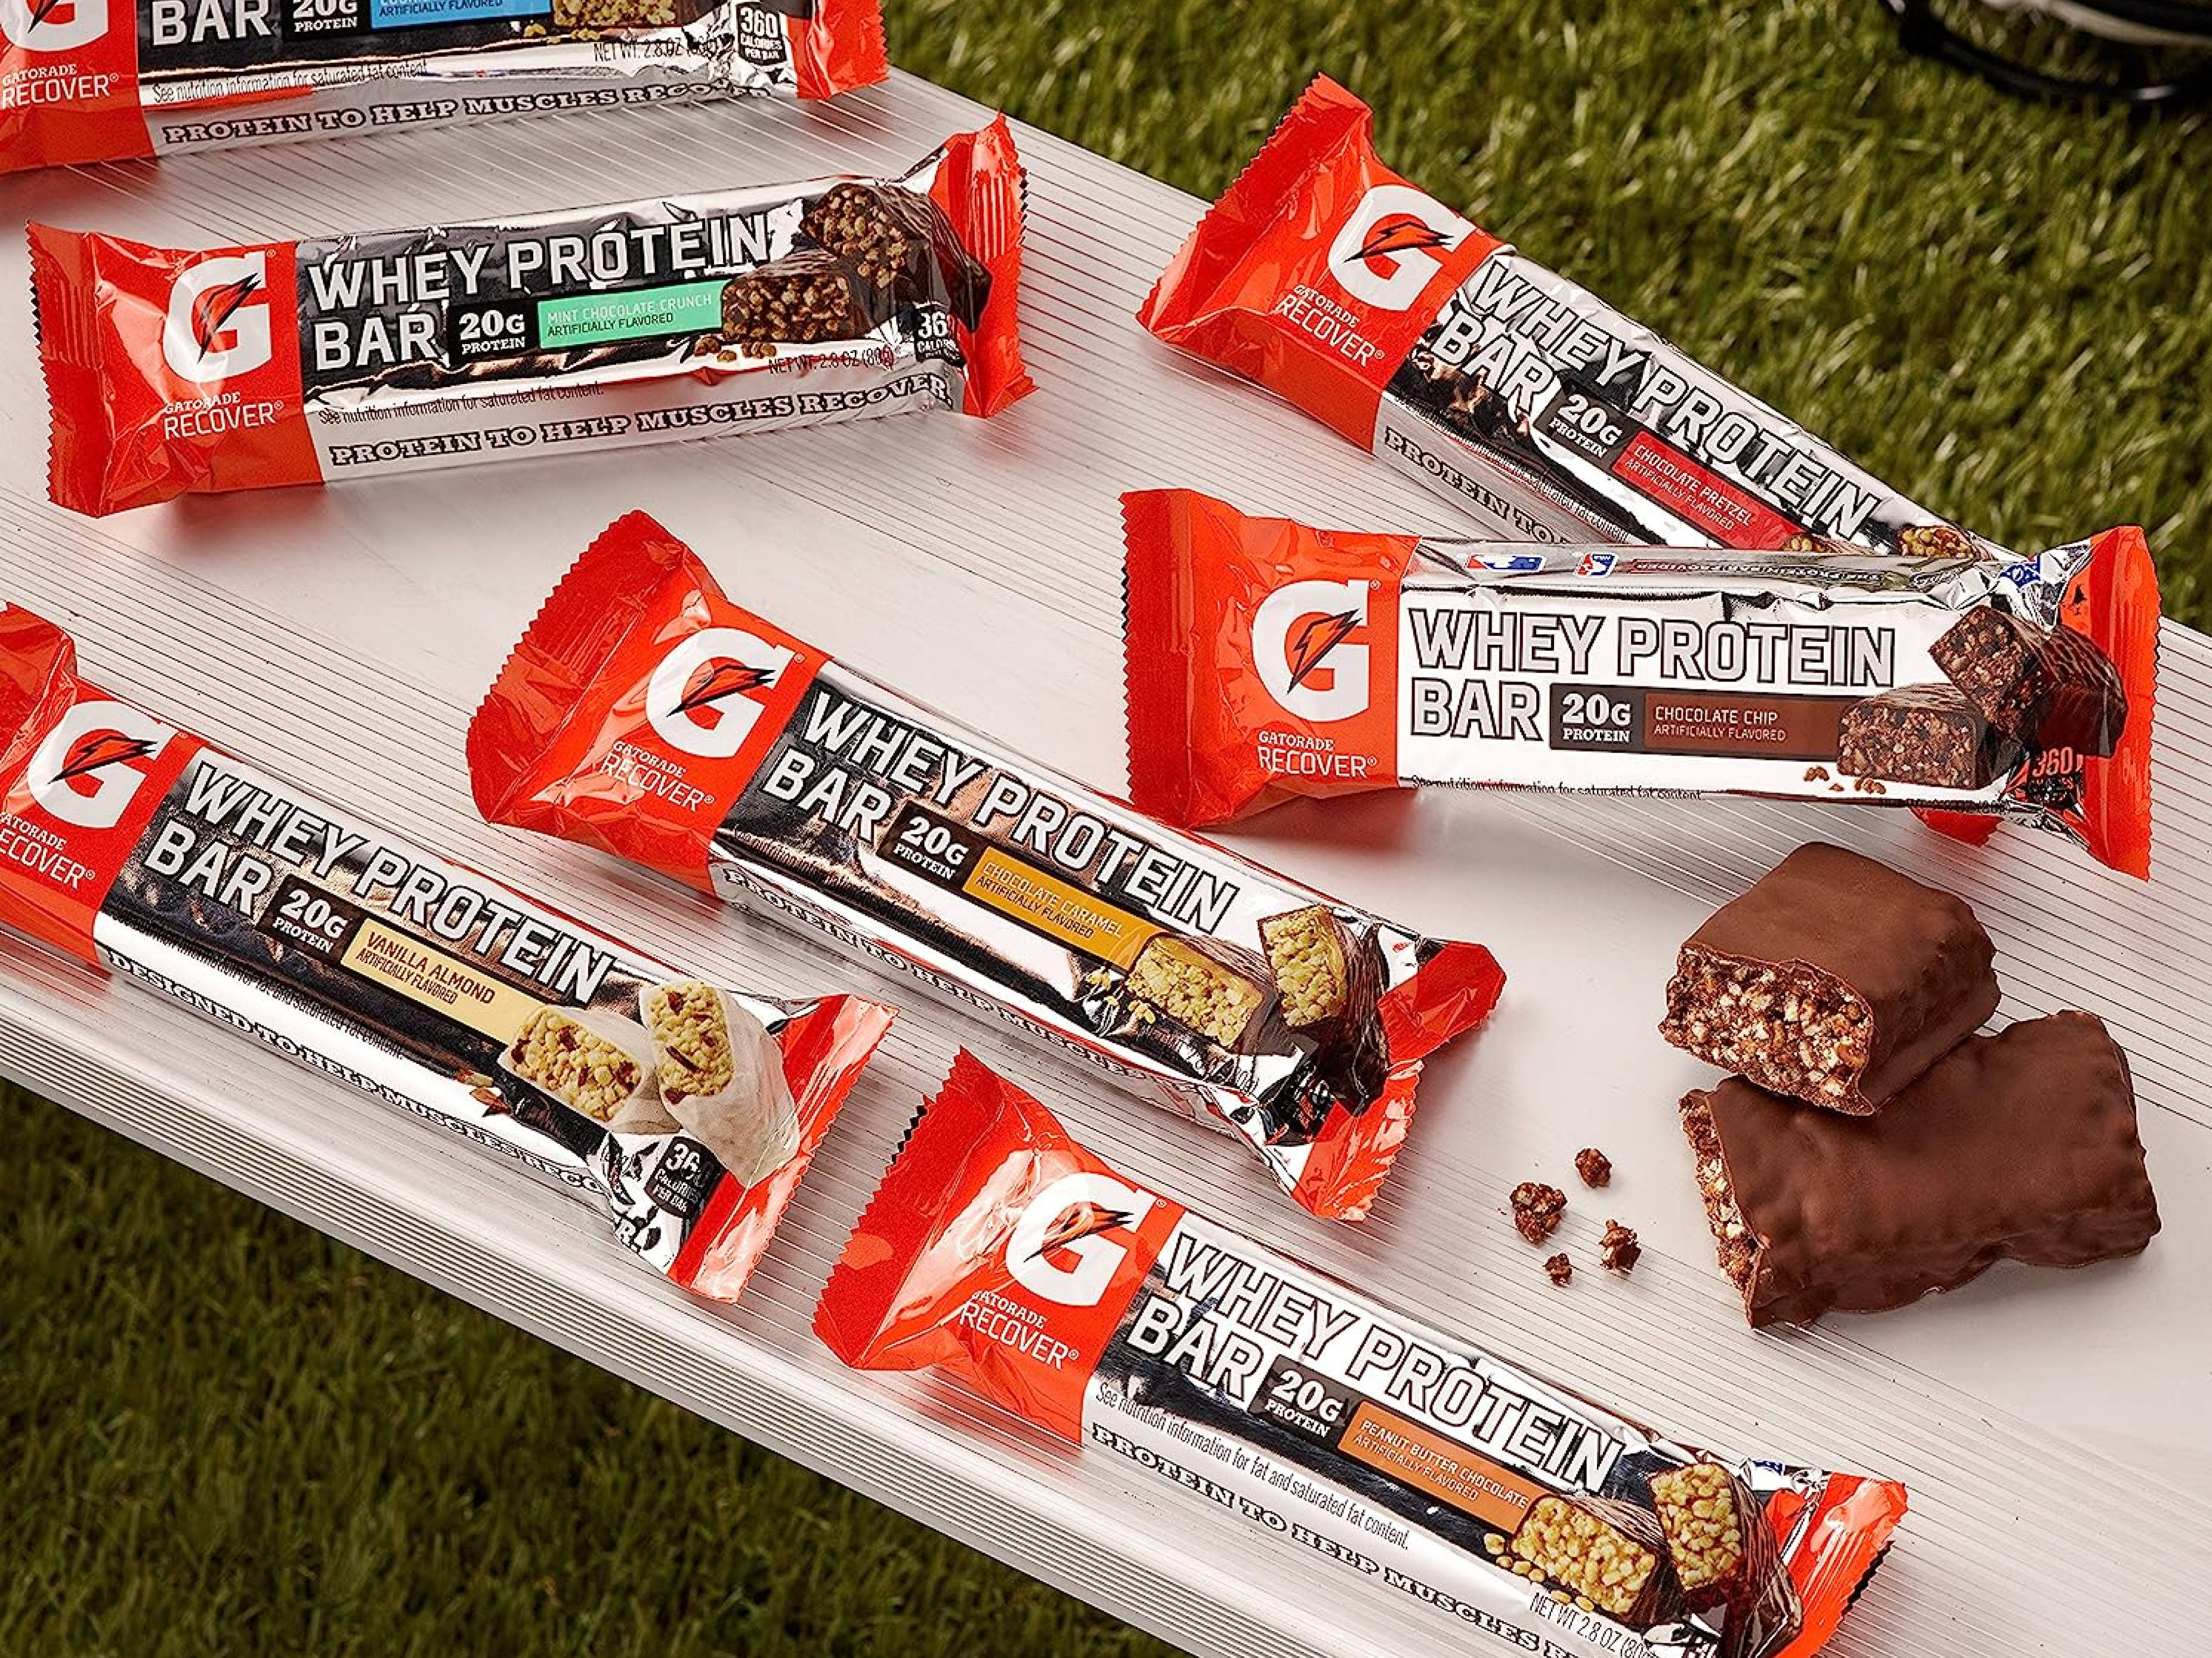 Protein bars on a bench